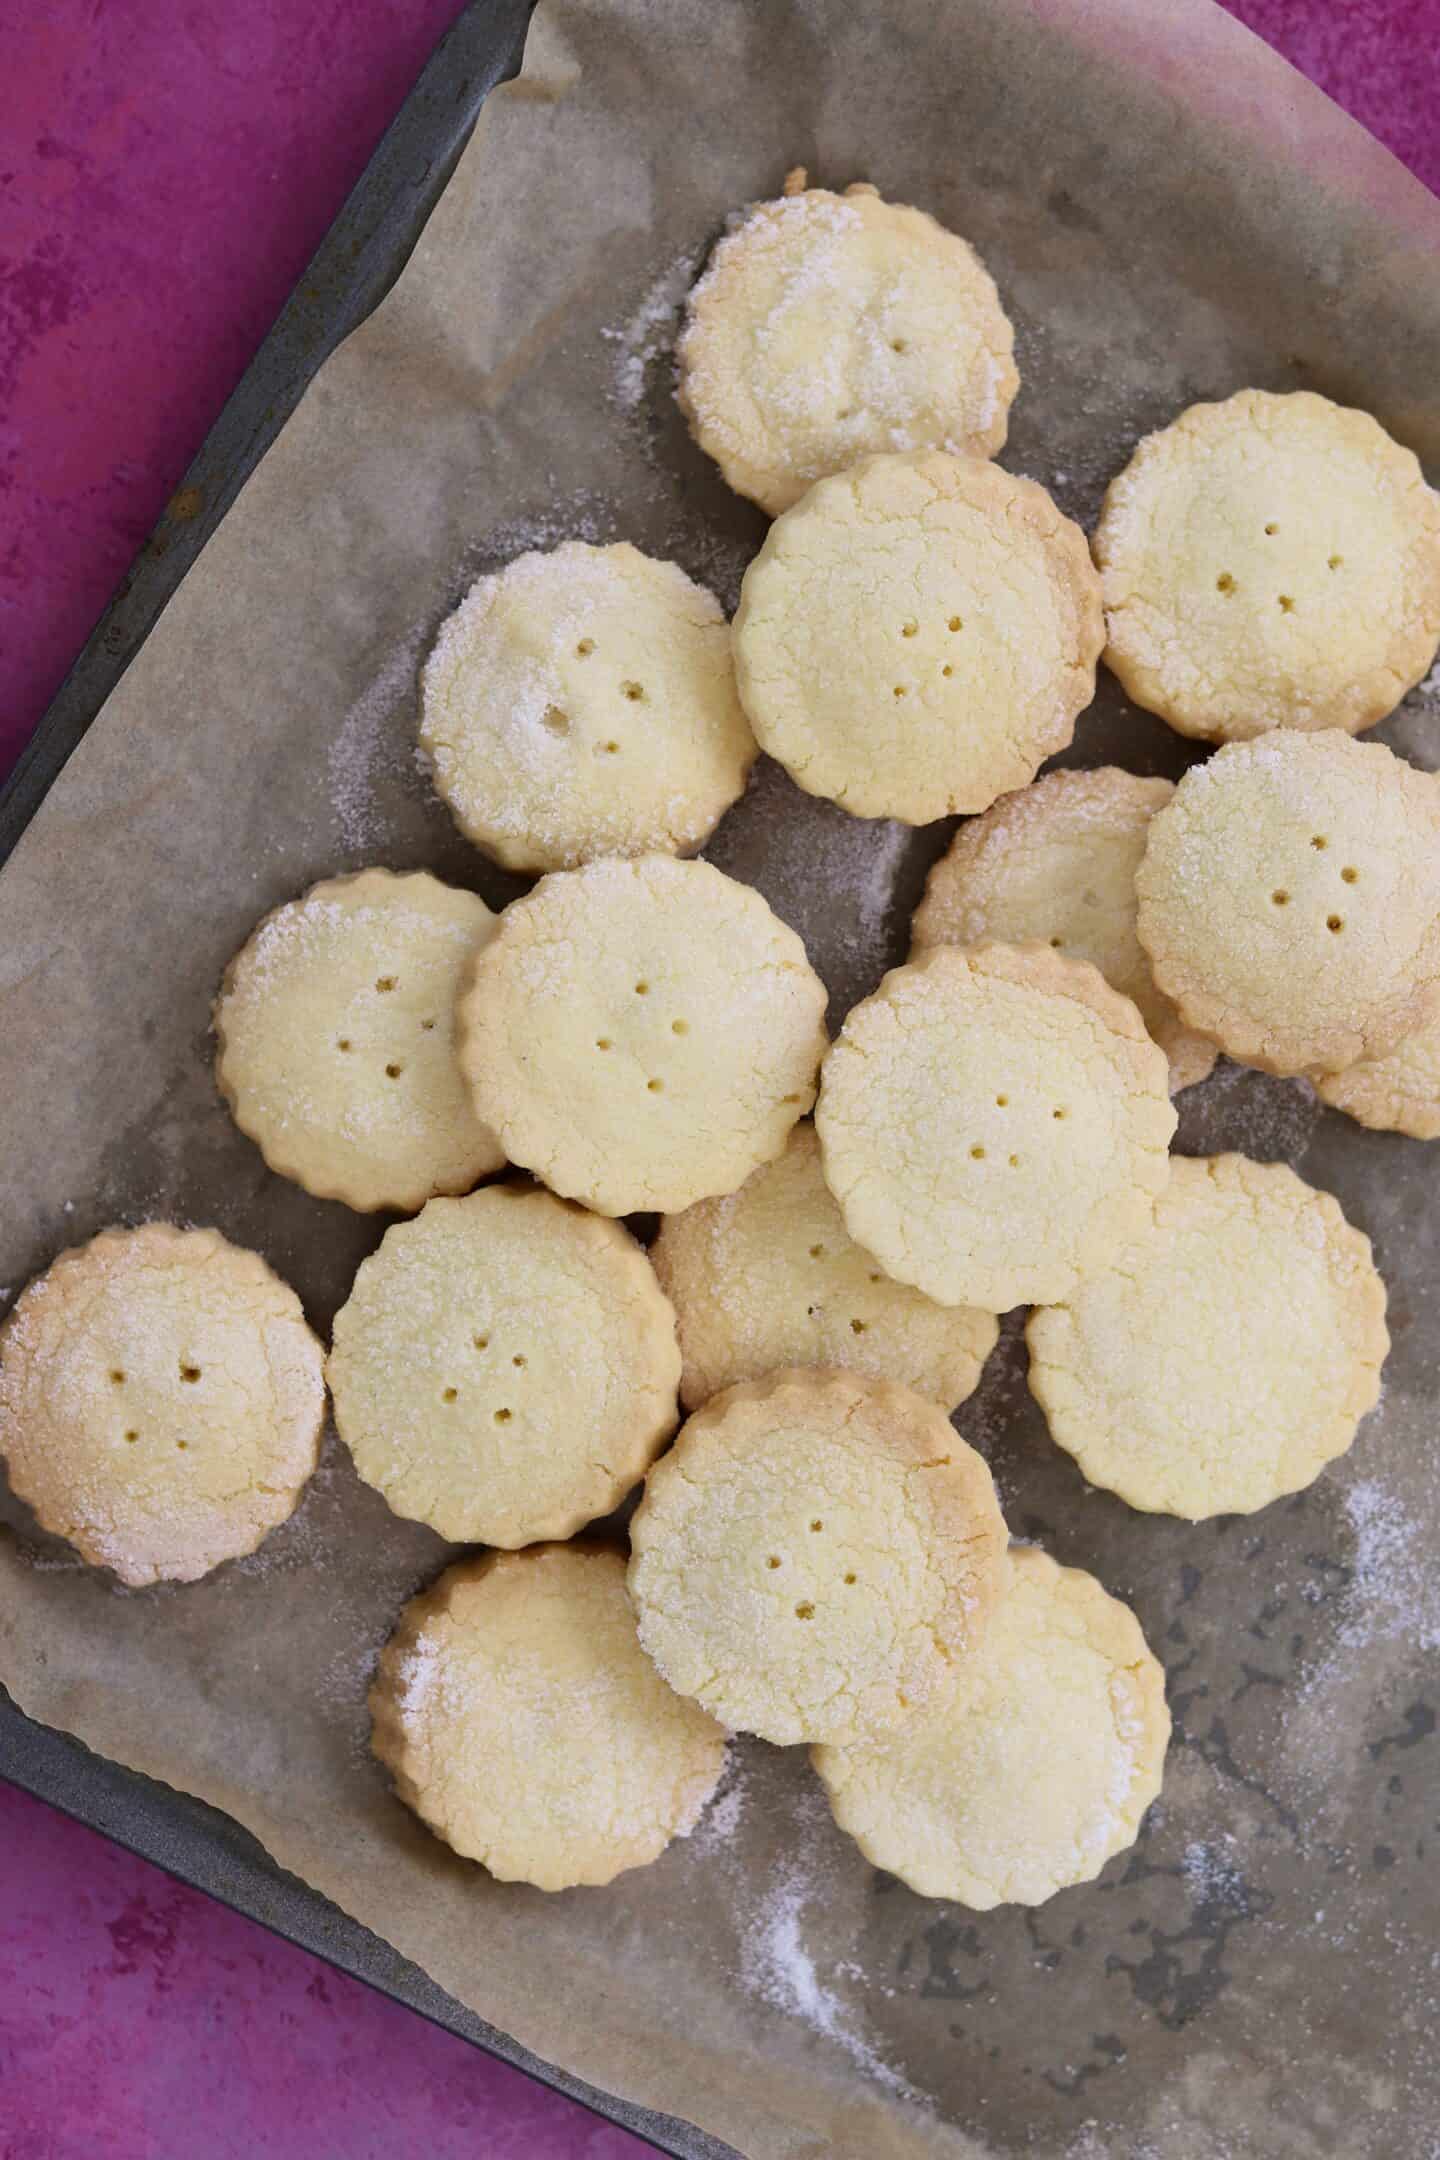 A tray of freshly baked gluten free shortbread biscuits.